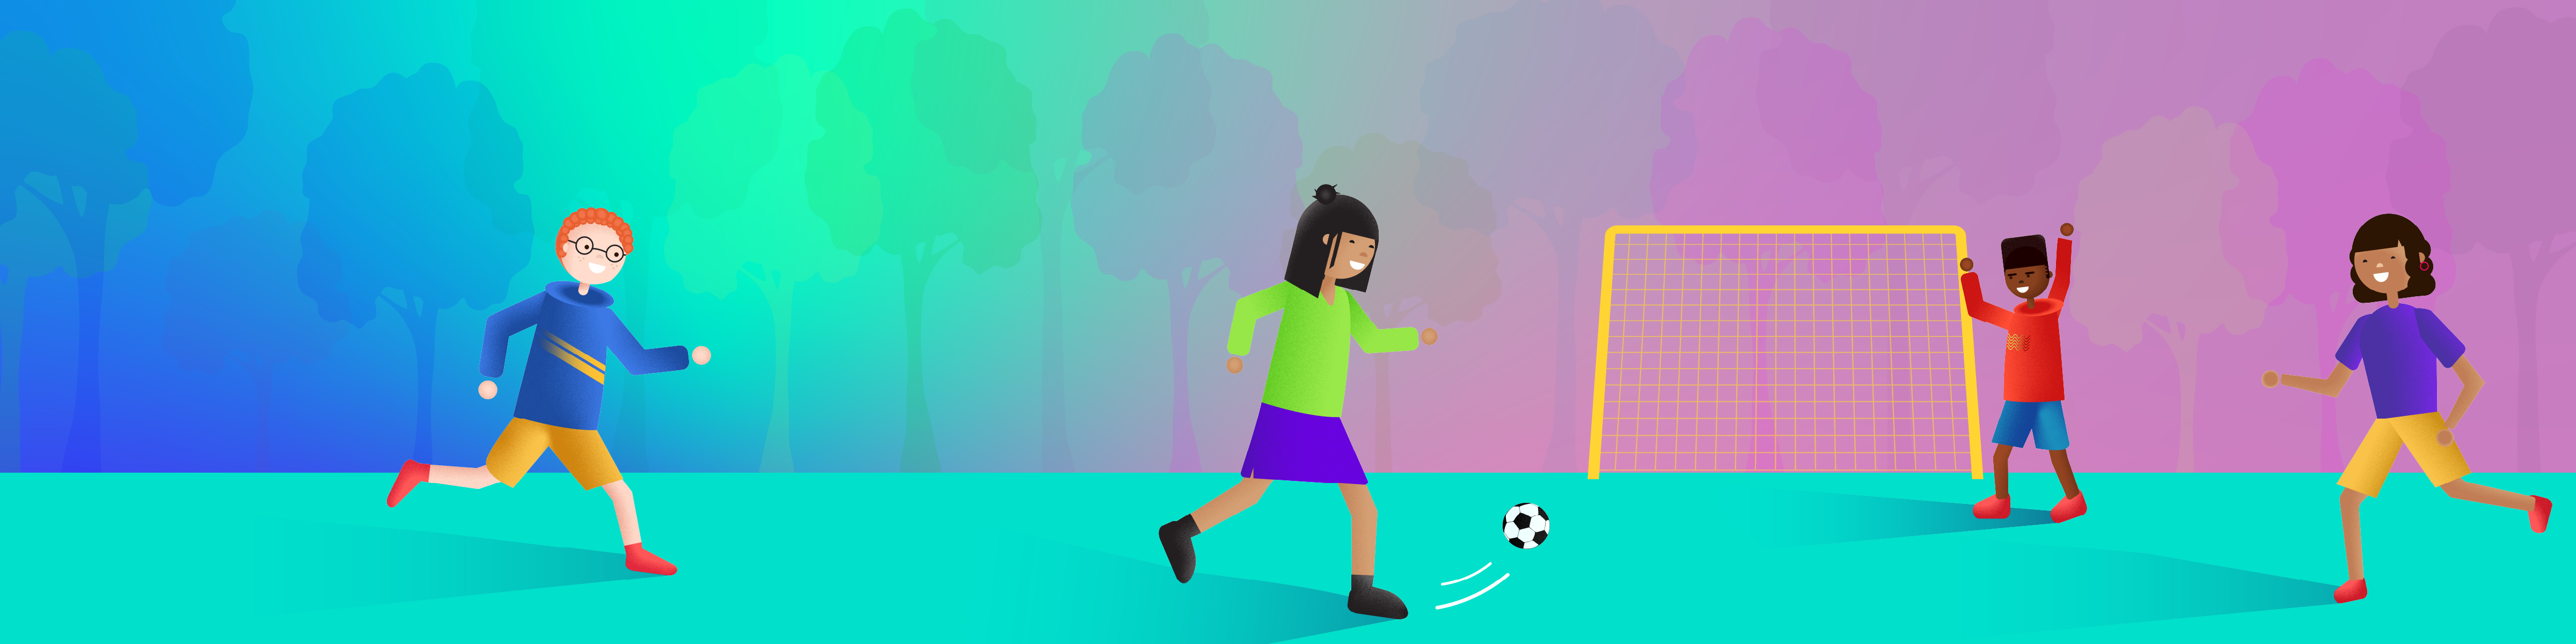 image of 4 children playing soccer